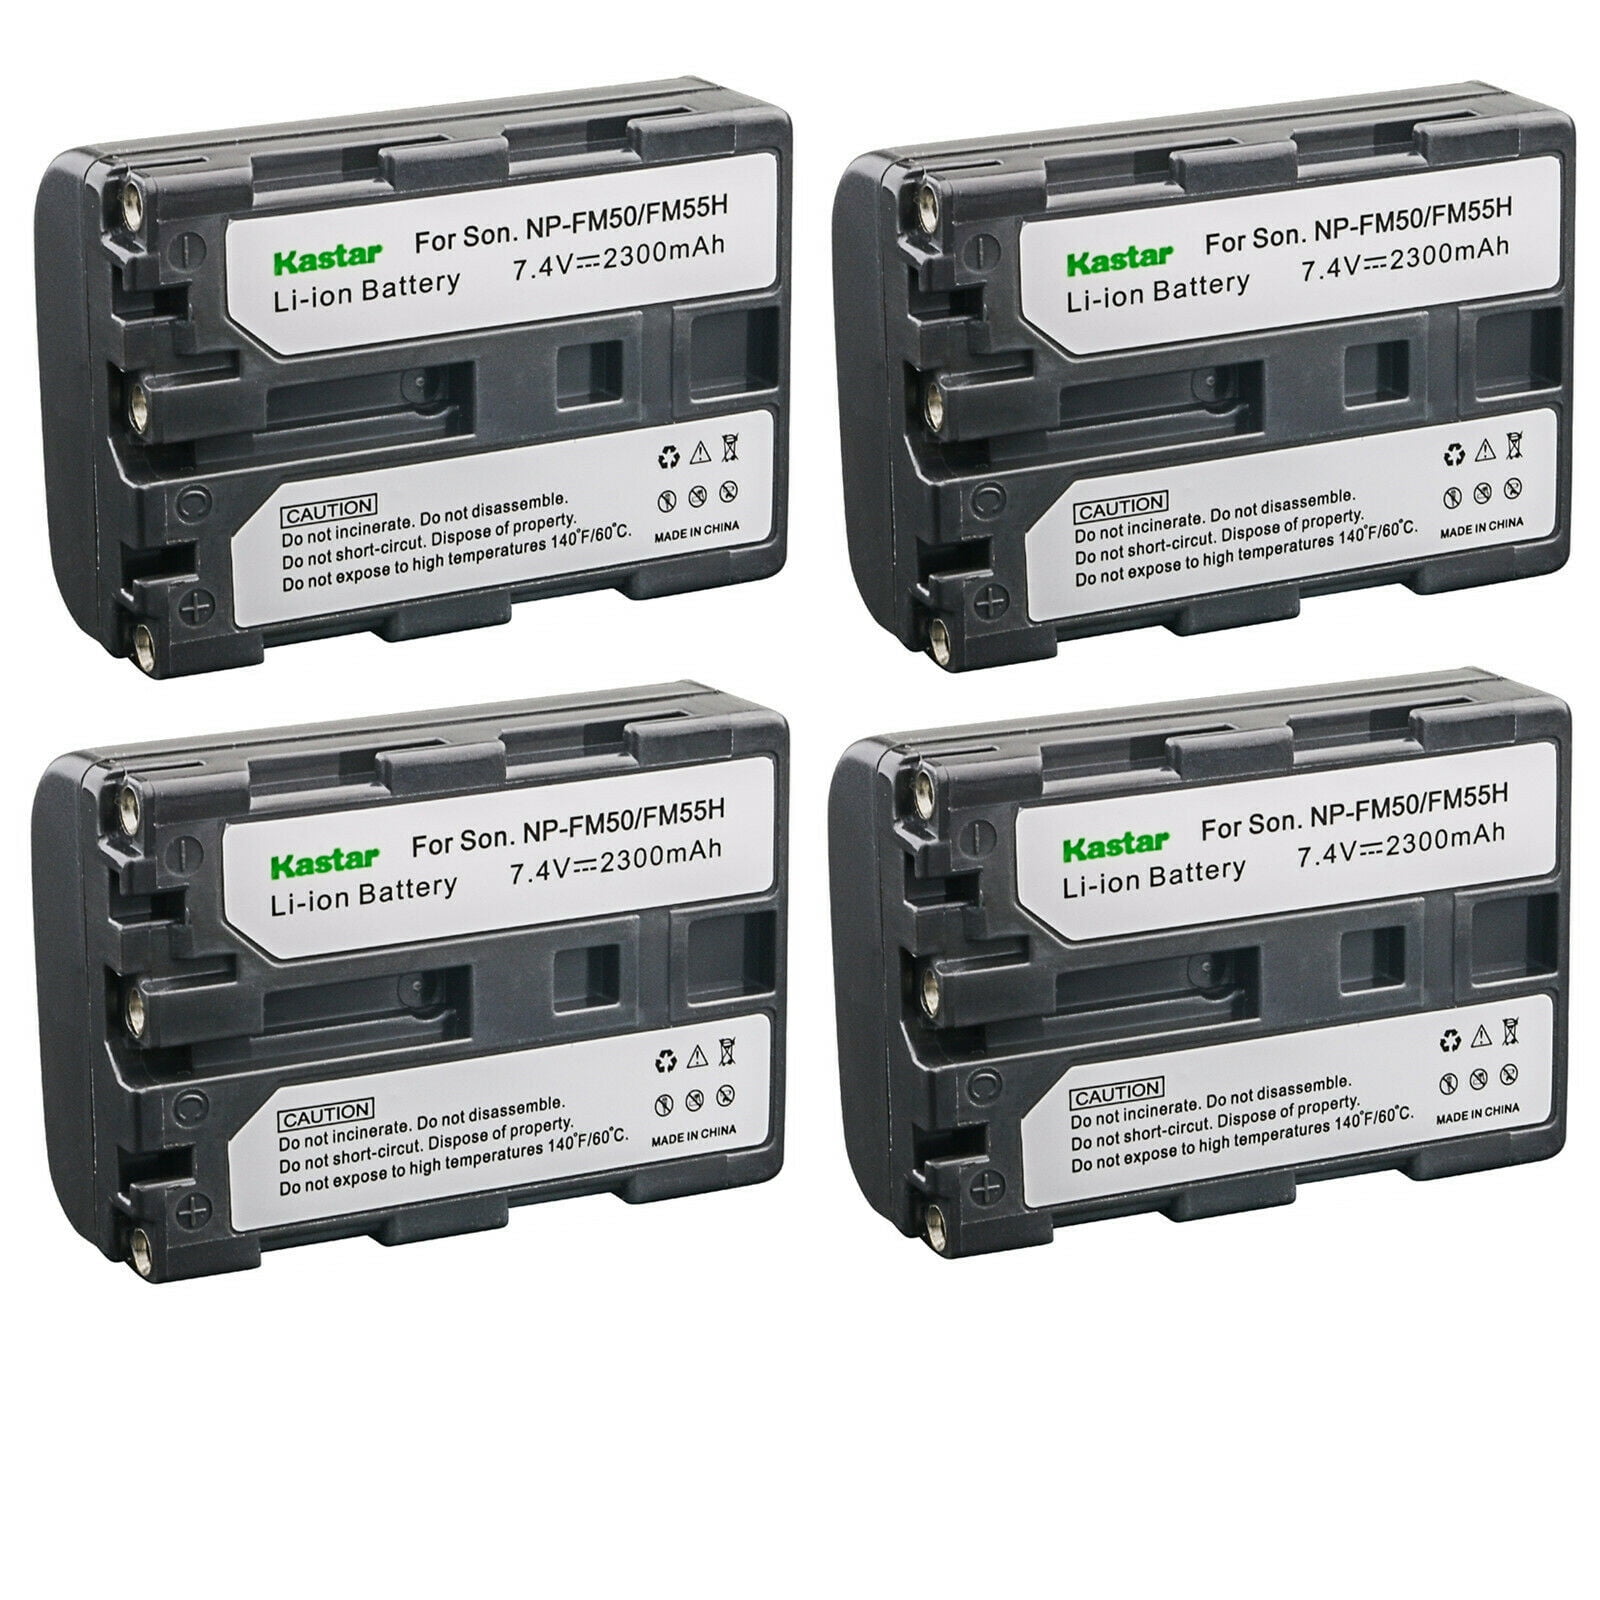 Kastar Battery 4-Pack for Sony NP-QM91D NP-QM91 and DCR-HC14 DCR-HC15 DCR-HC88 DCR-PC100 DCR-PC101 DCR-PC103 DCR-PC104 DCR-PC105 DCR-PC110 DCR-PC115 DCR-PC120 DCR-PC330 DCR-PC6 DCR-PC8 DCR-PC9 